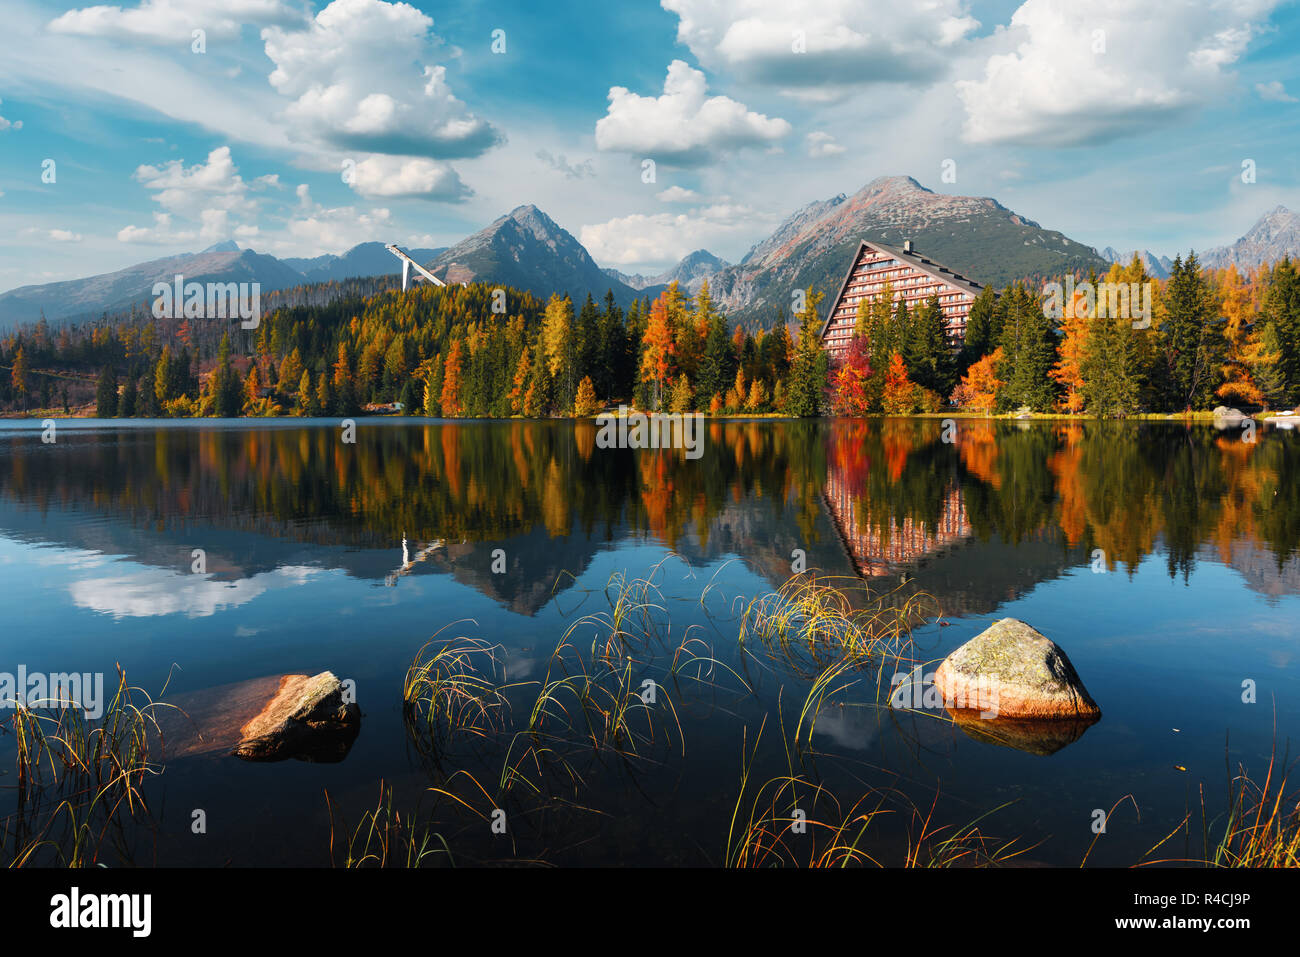 Picturesque autumn view of lake Strbske pleso in High Tatras National Park, Slovakia. Clear water with reflections of orange larch and high mountains Stock Photo